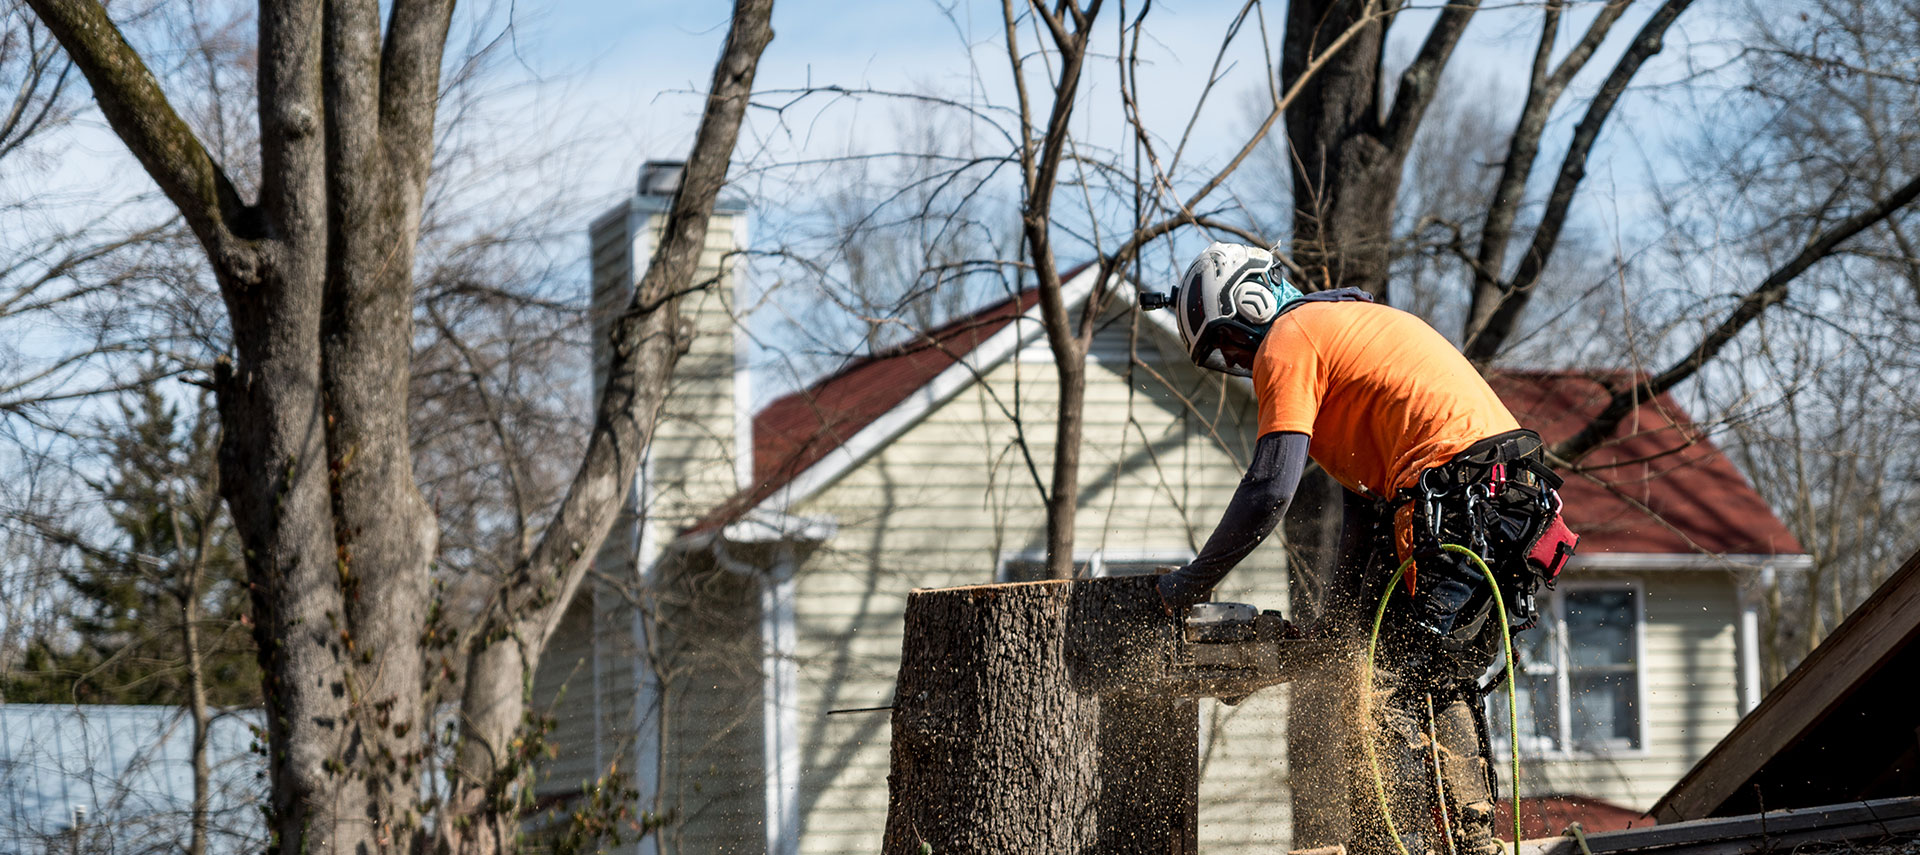 Our Hixson professional tree service in action, dividing a tree into smaller sections.